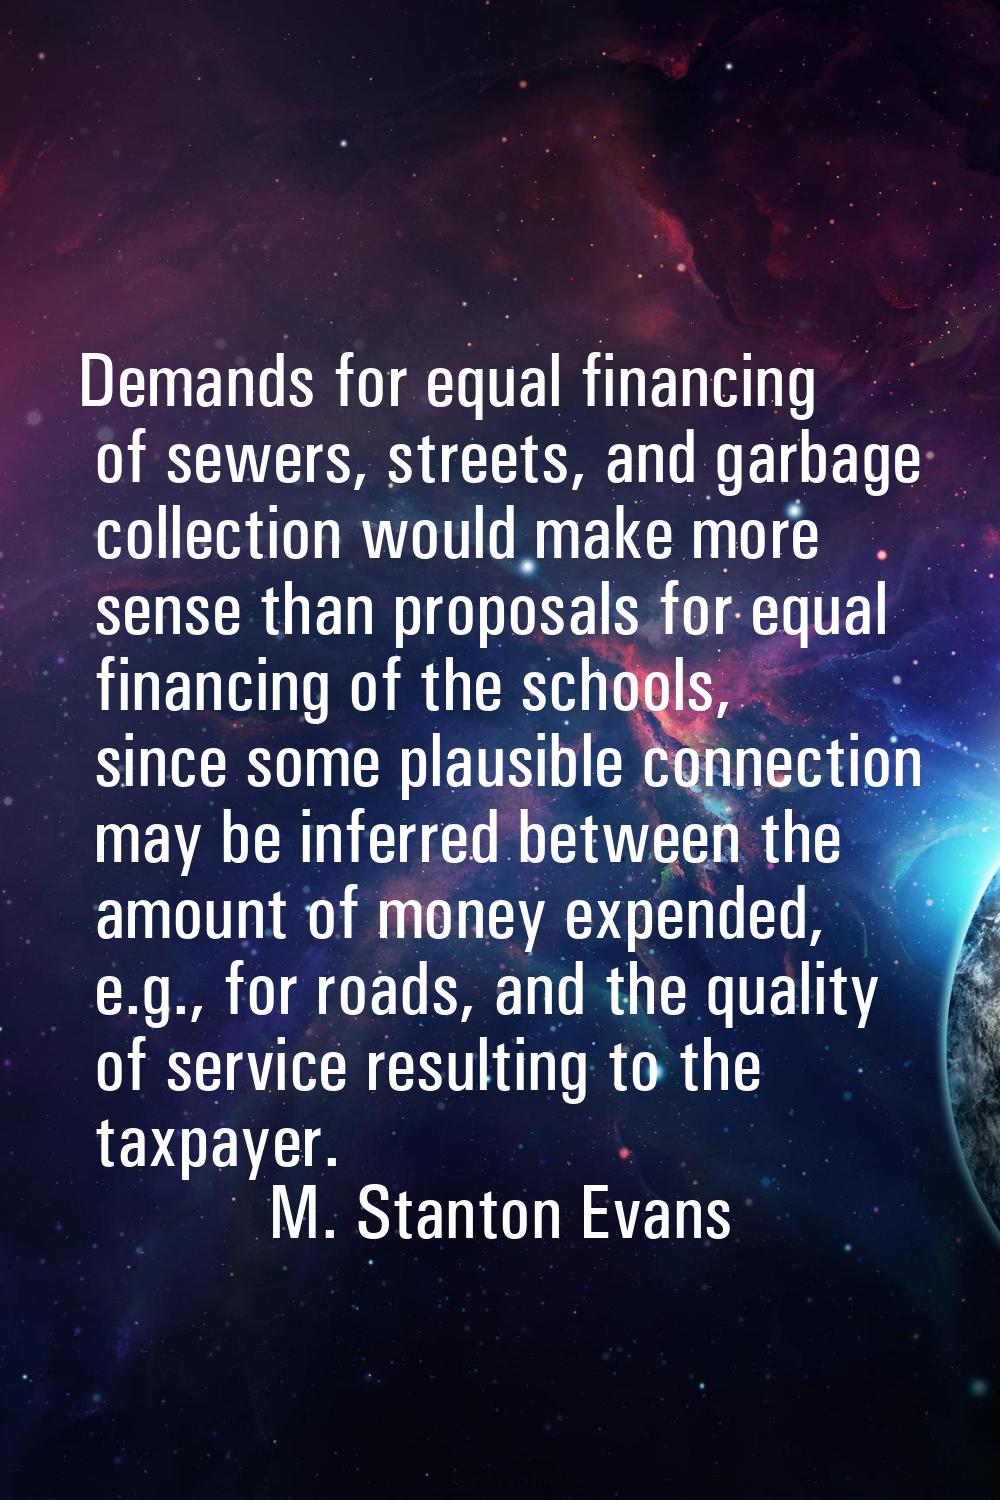 Demands for equal financing of sewers, streets, and garbage collection would make more sense than p